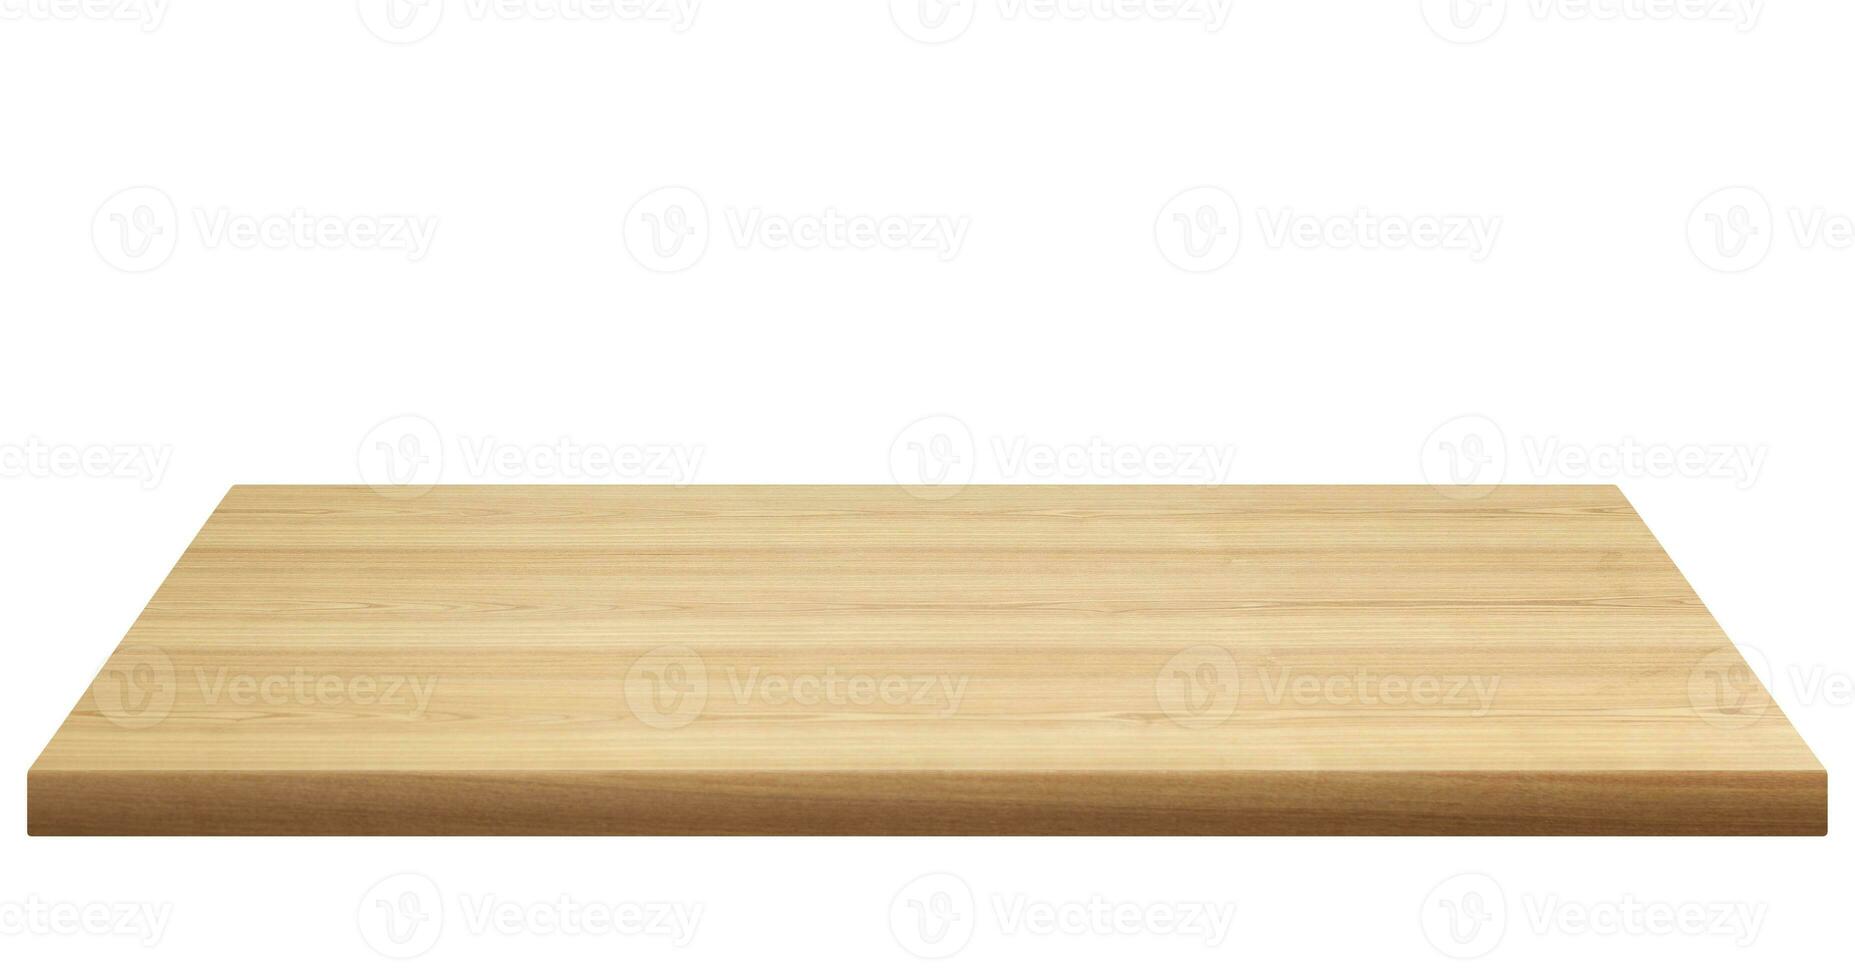 Wooden planks, wooden floors, wooden tables on a white background photo